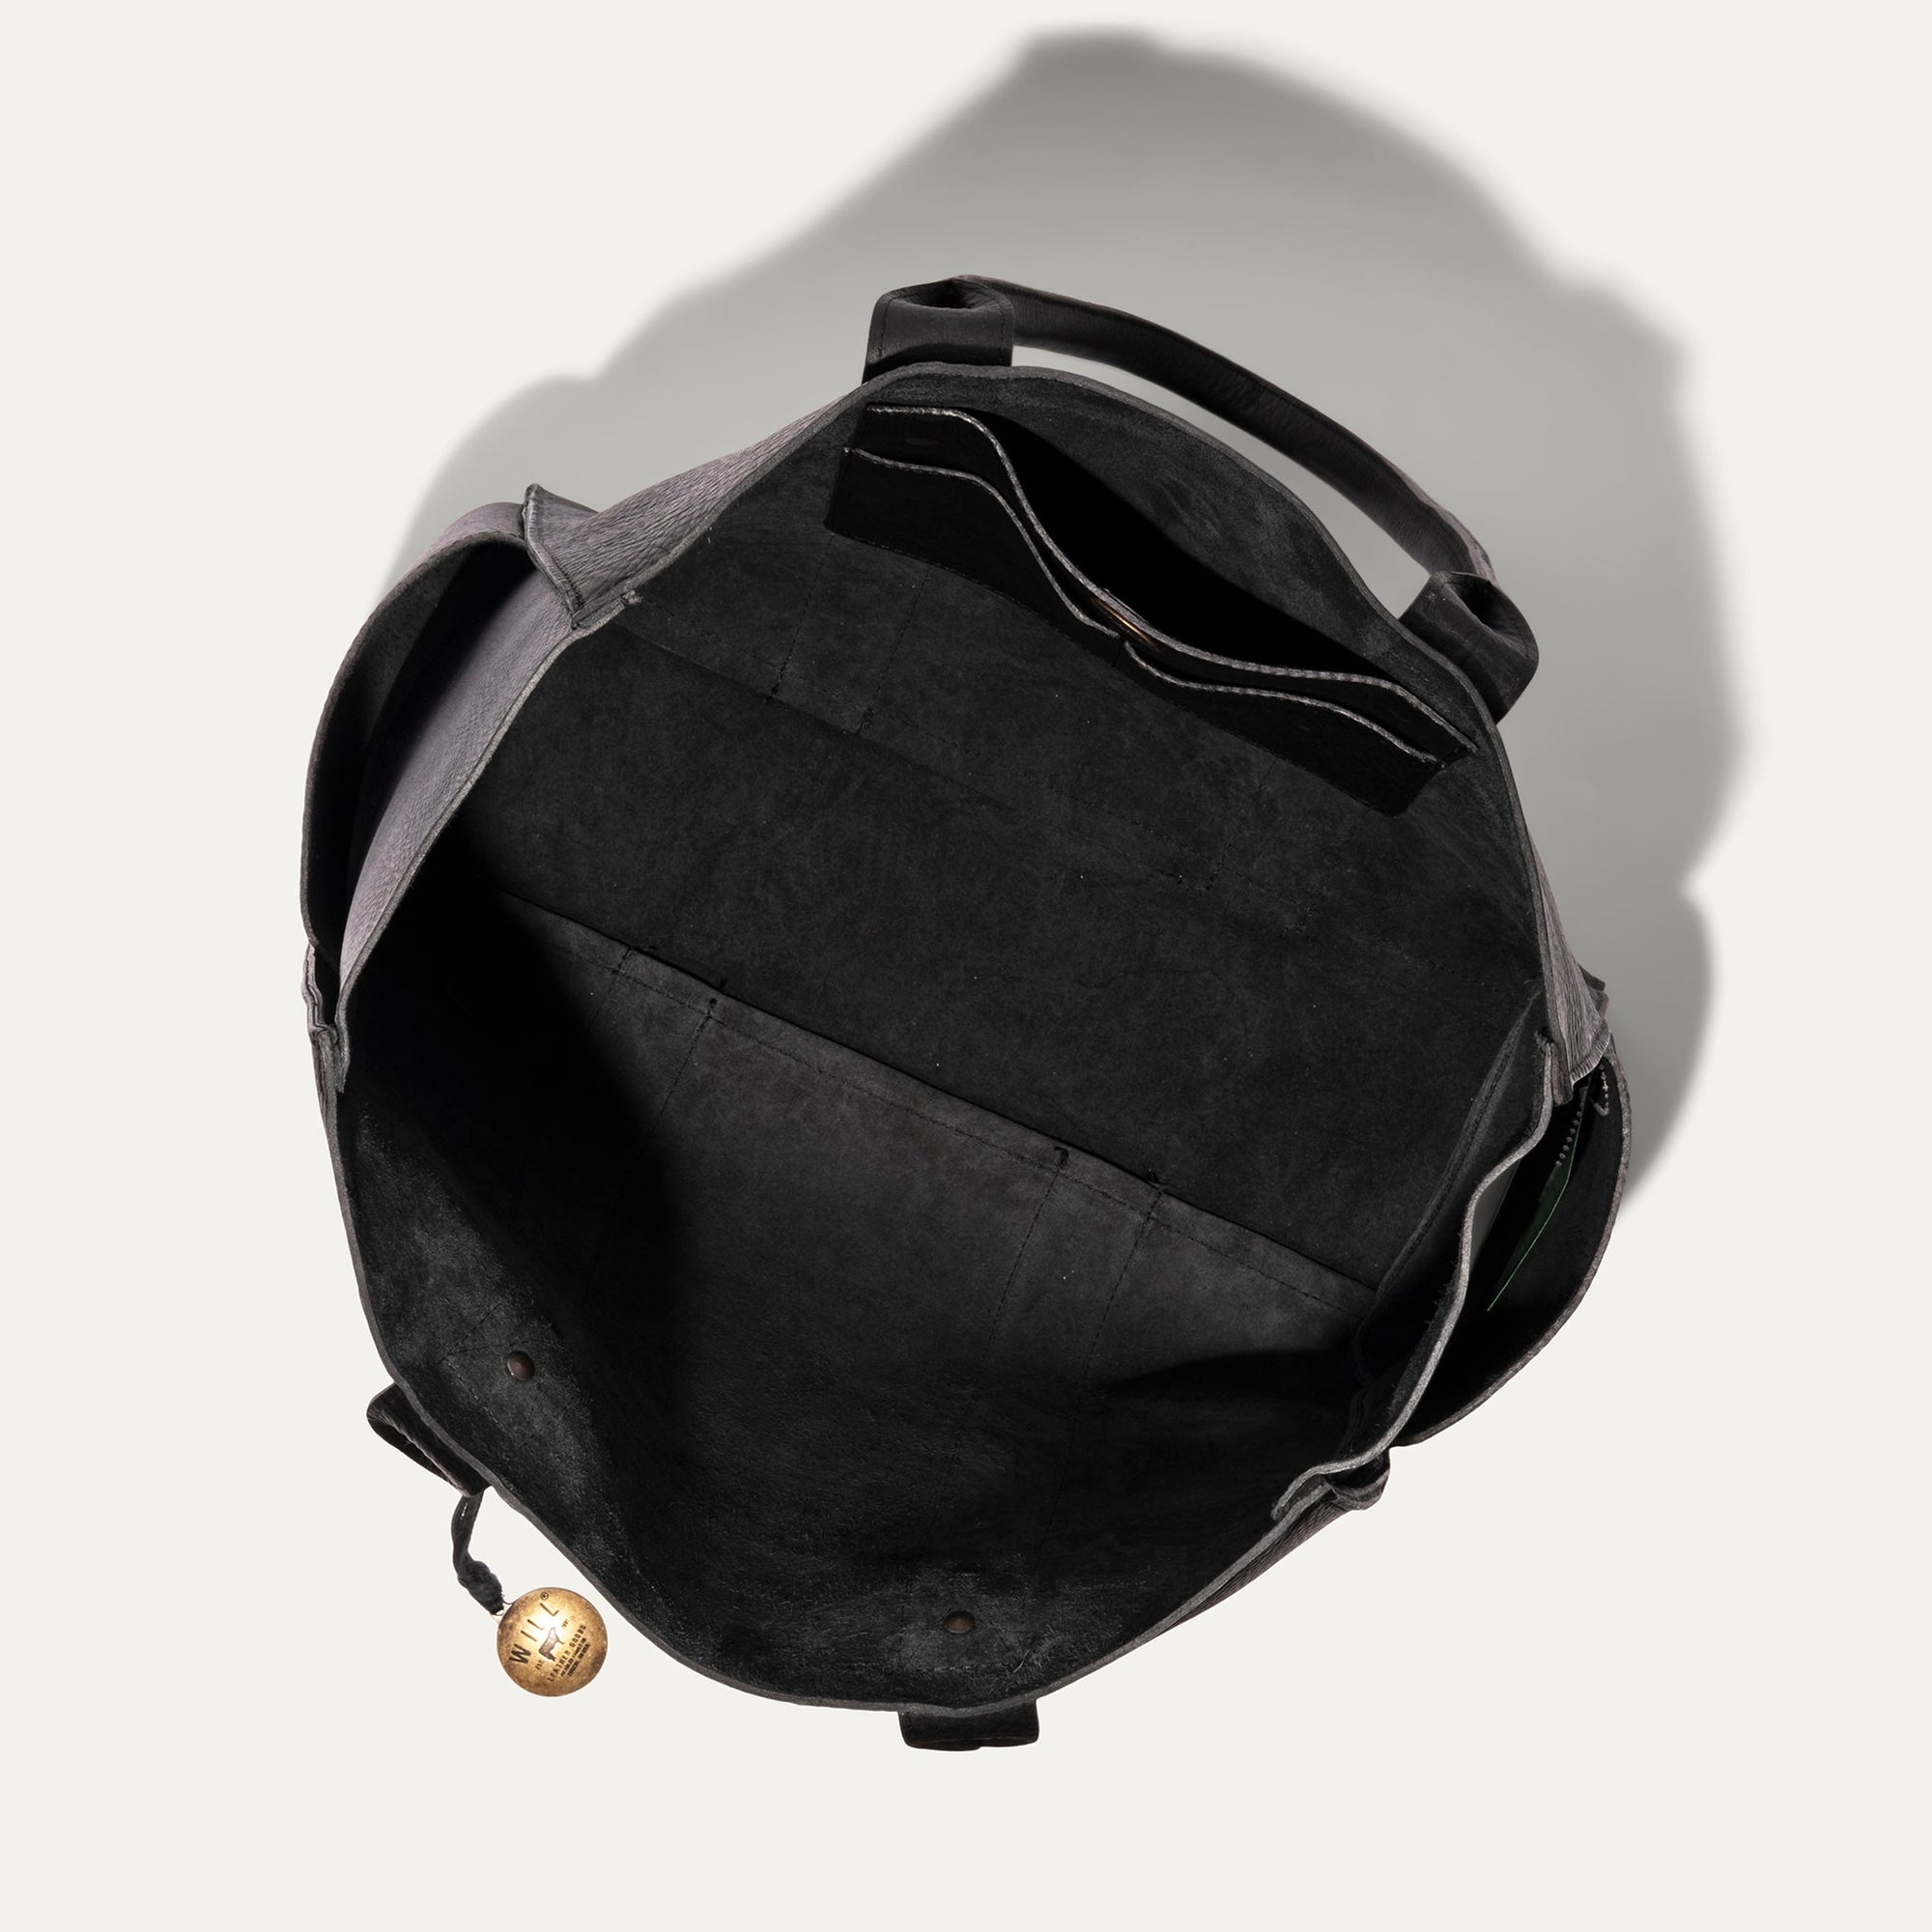 All Leather Utility Tote in Black by Will Leather Goods